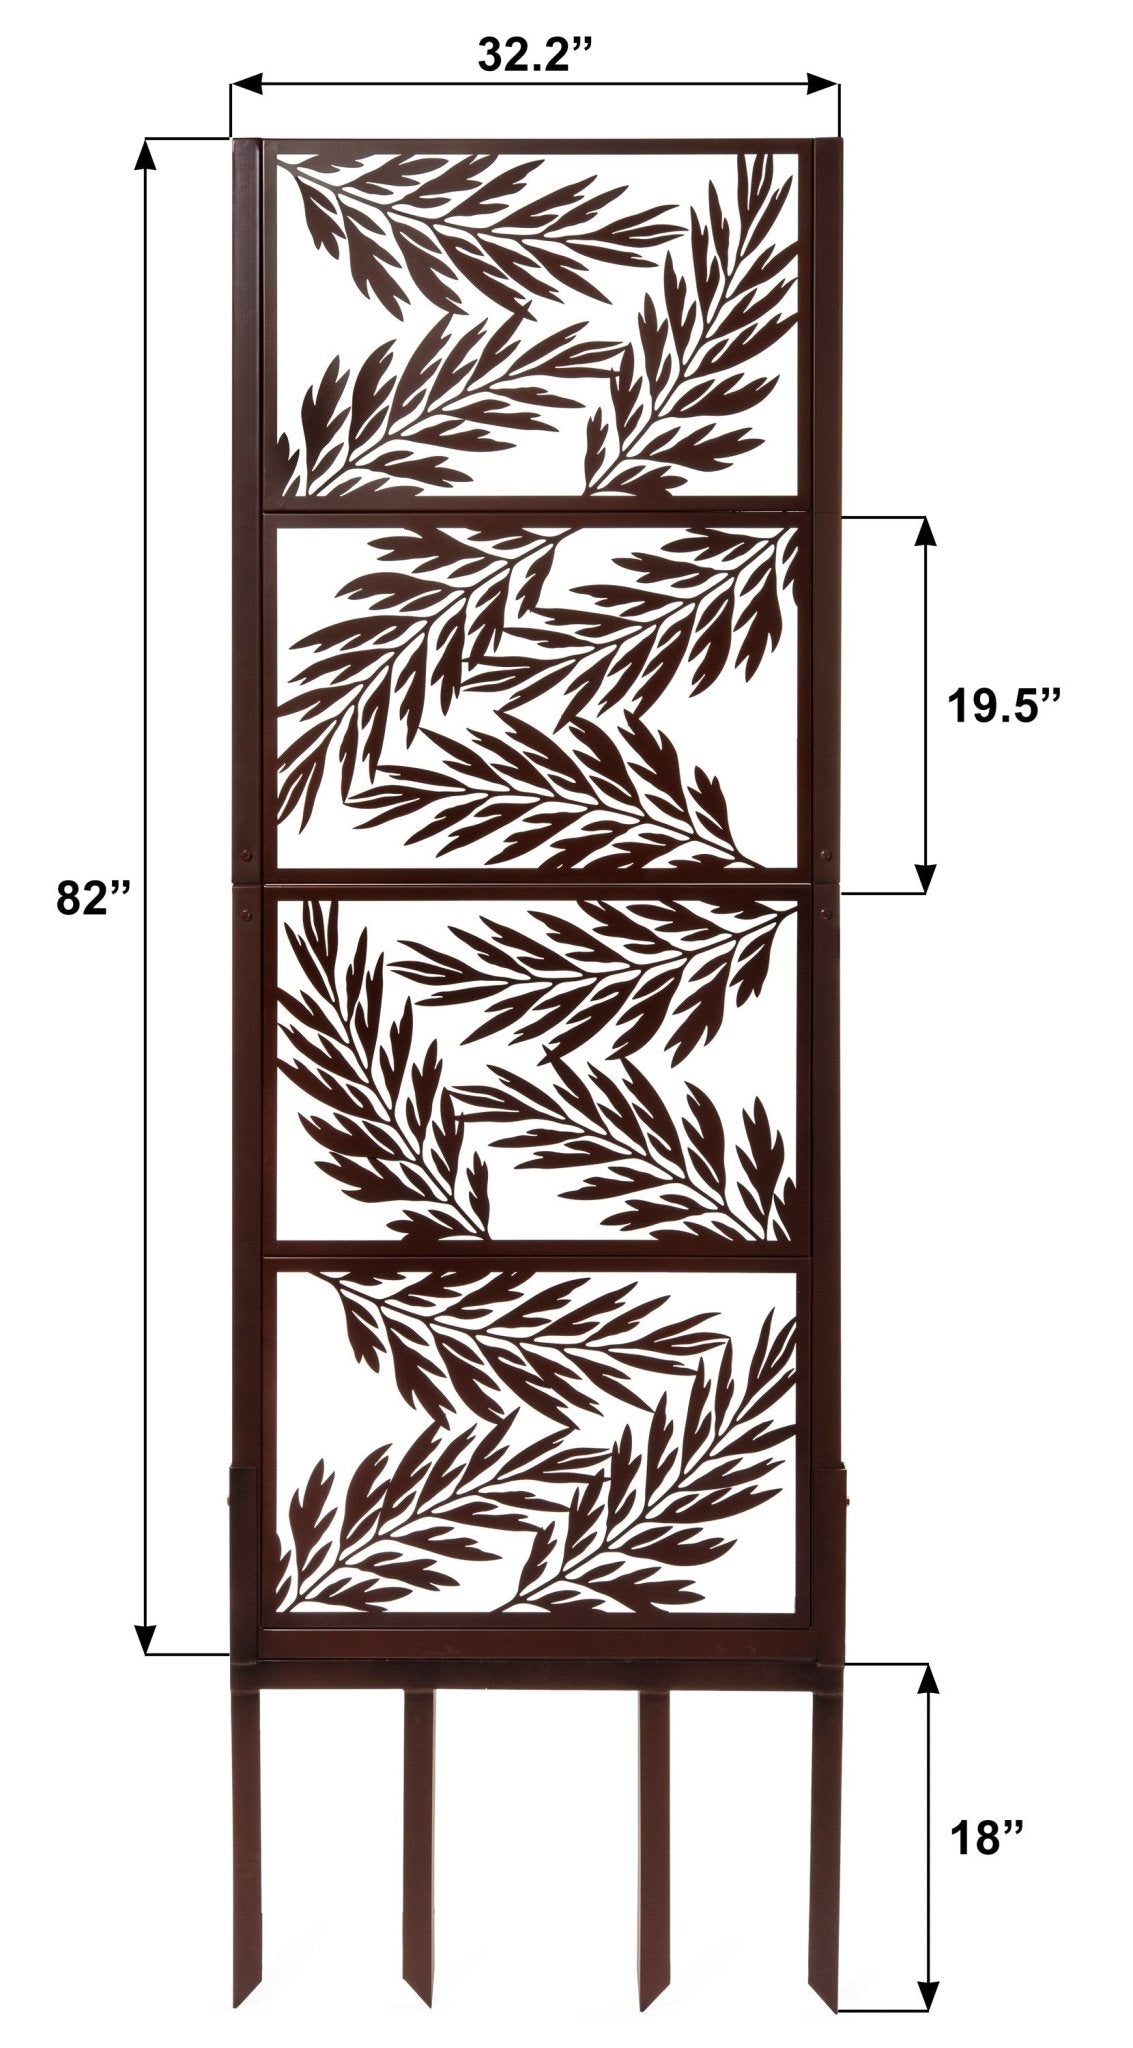 H Potter Garden Trellis Screen Privacy for Deck Patio Balcony with Ground Spikes